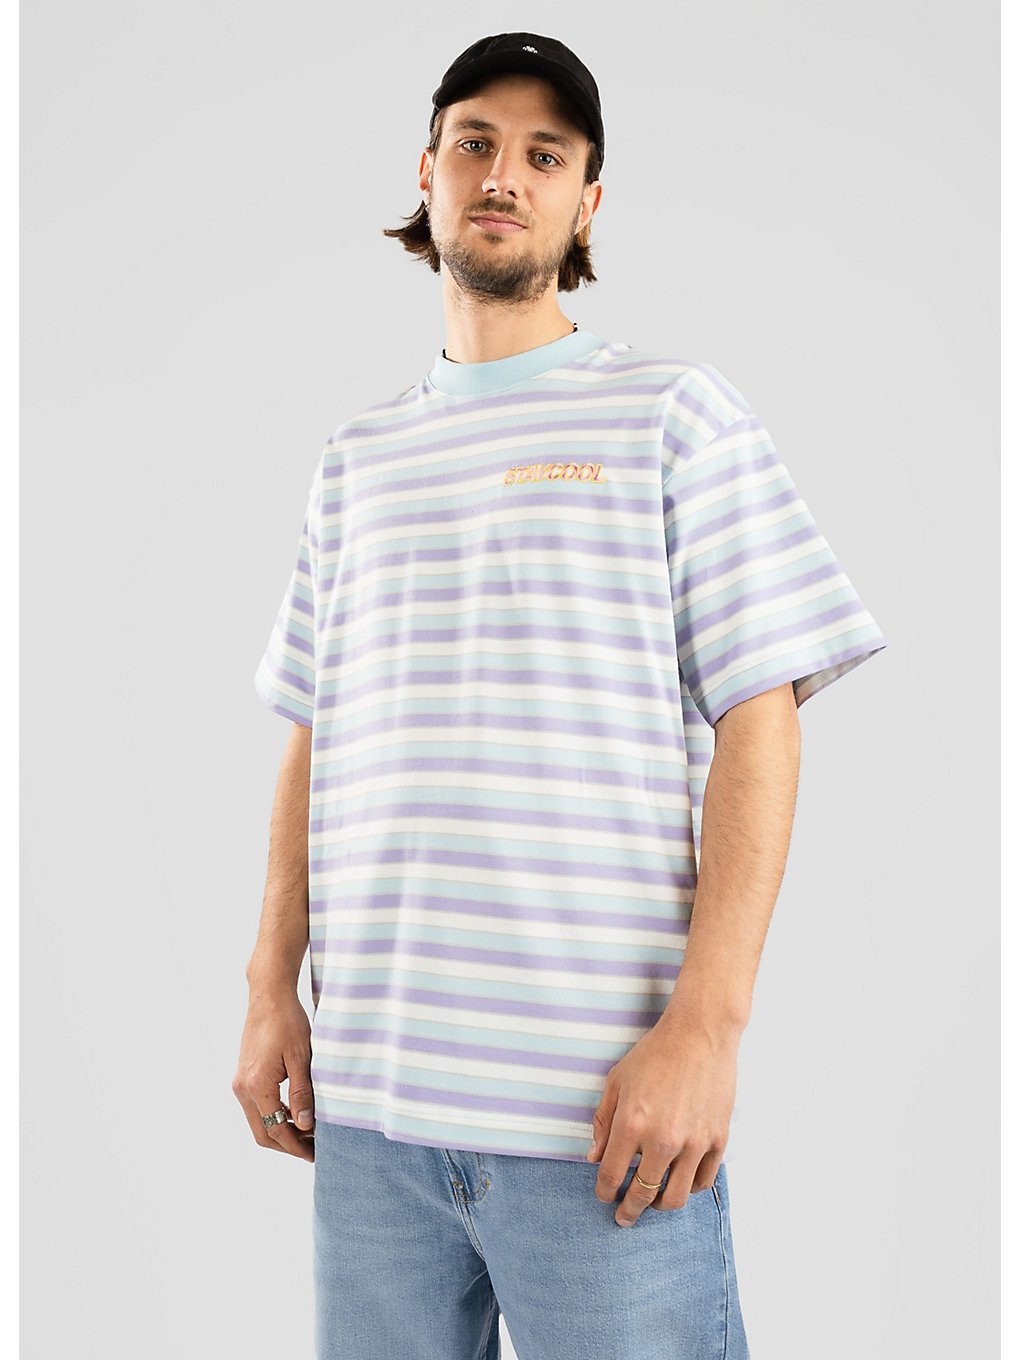 Image of Staycoolnyc Blueberry Striped T-Shirt fantasia